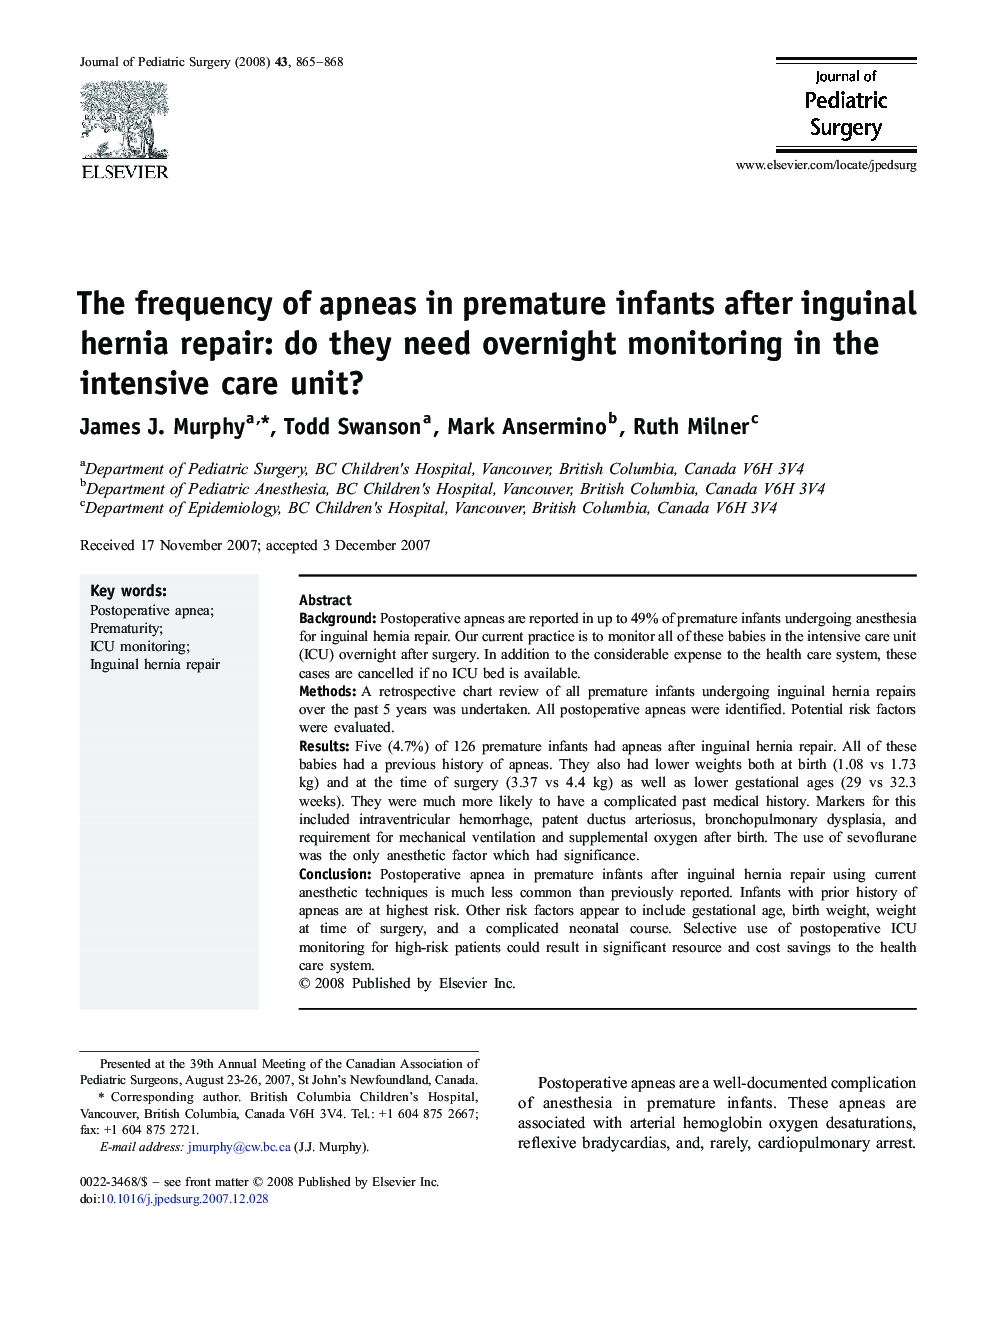 The frequency of apneas in premature infants after inguinal hernia repair: do they need overnight monitoring in the intensive care unit? 